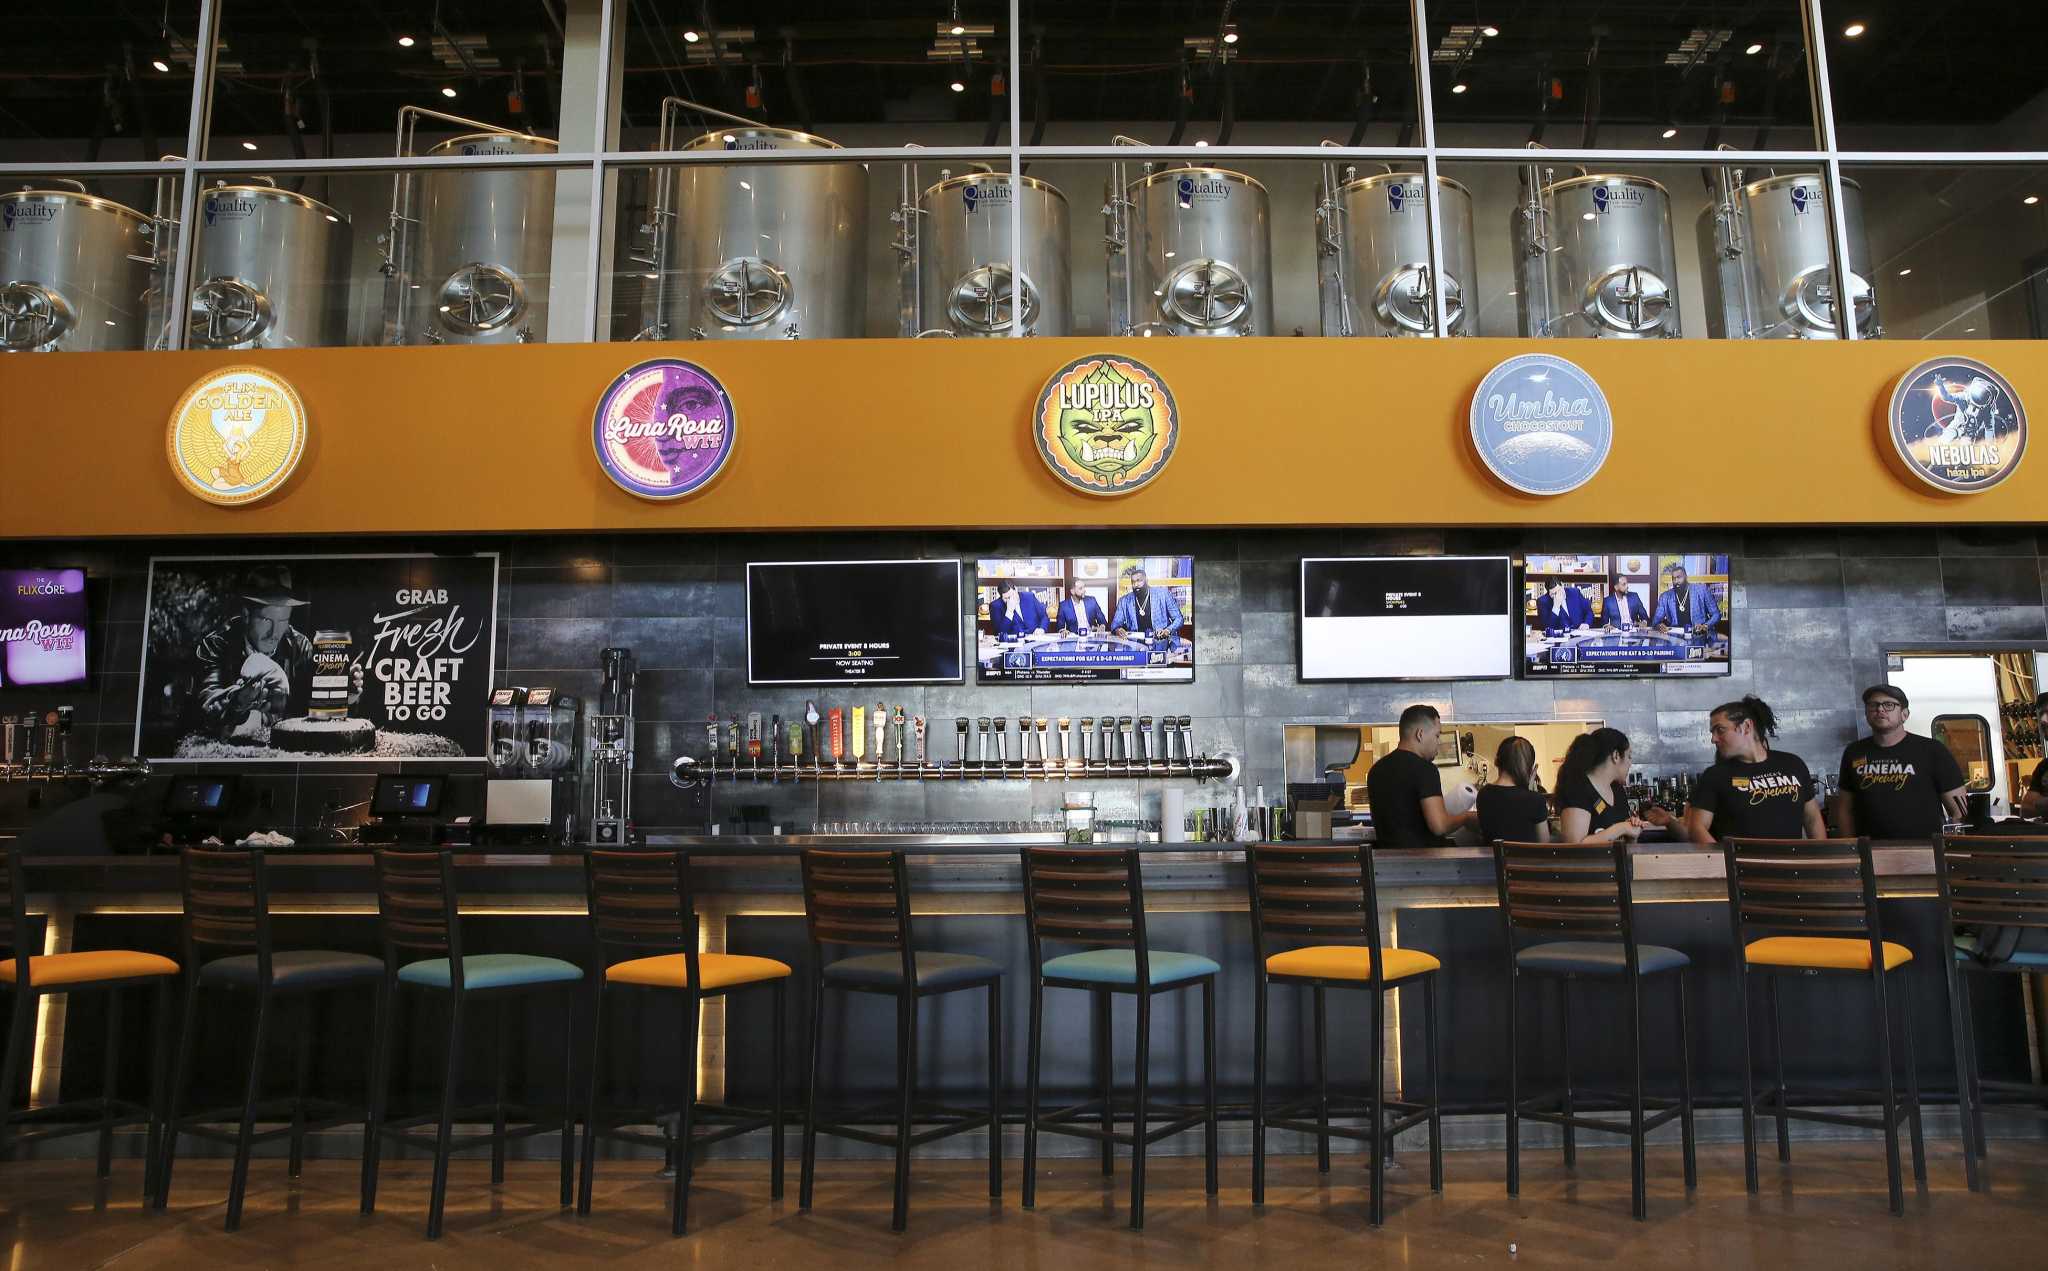 New Movie Theater Flix Brewhouse Opening On San Antonio S West Side With On Site Brewery And Scratch Made Food Expressnews Com